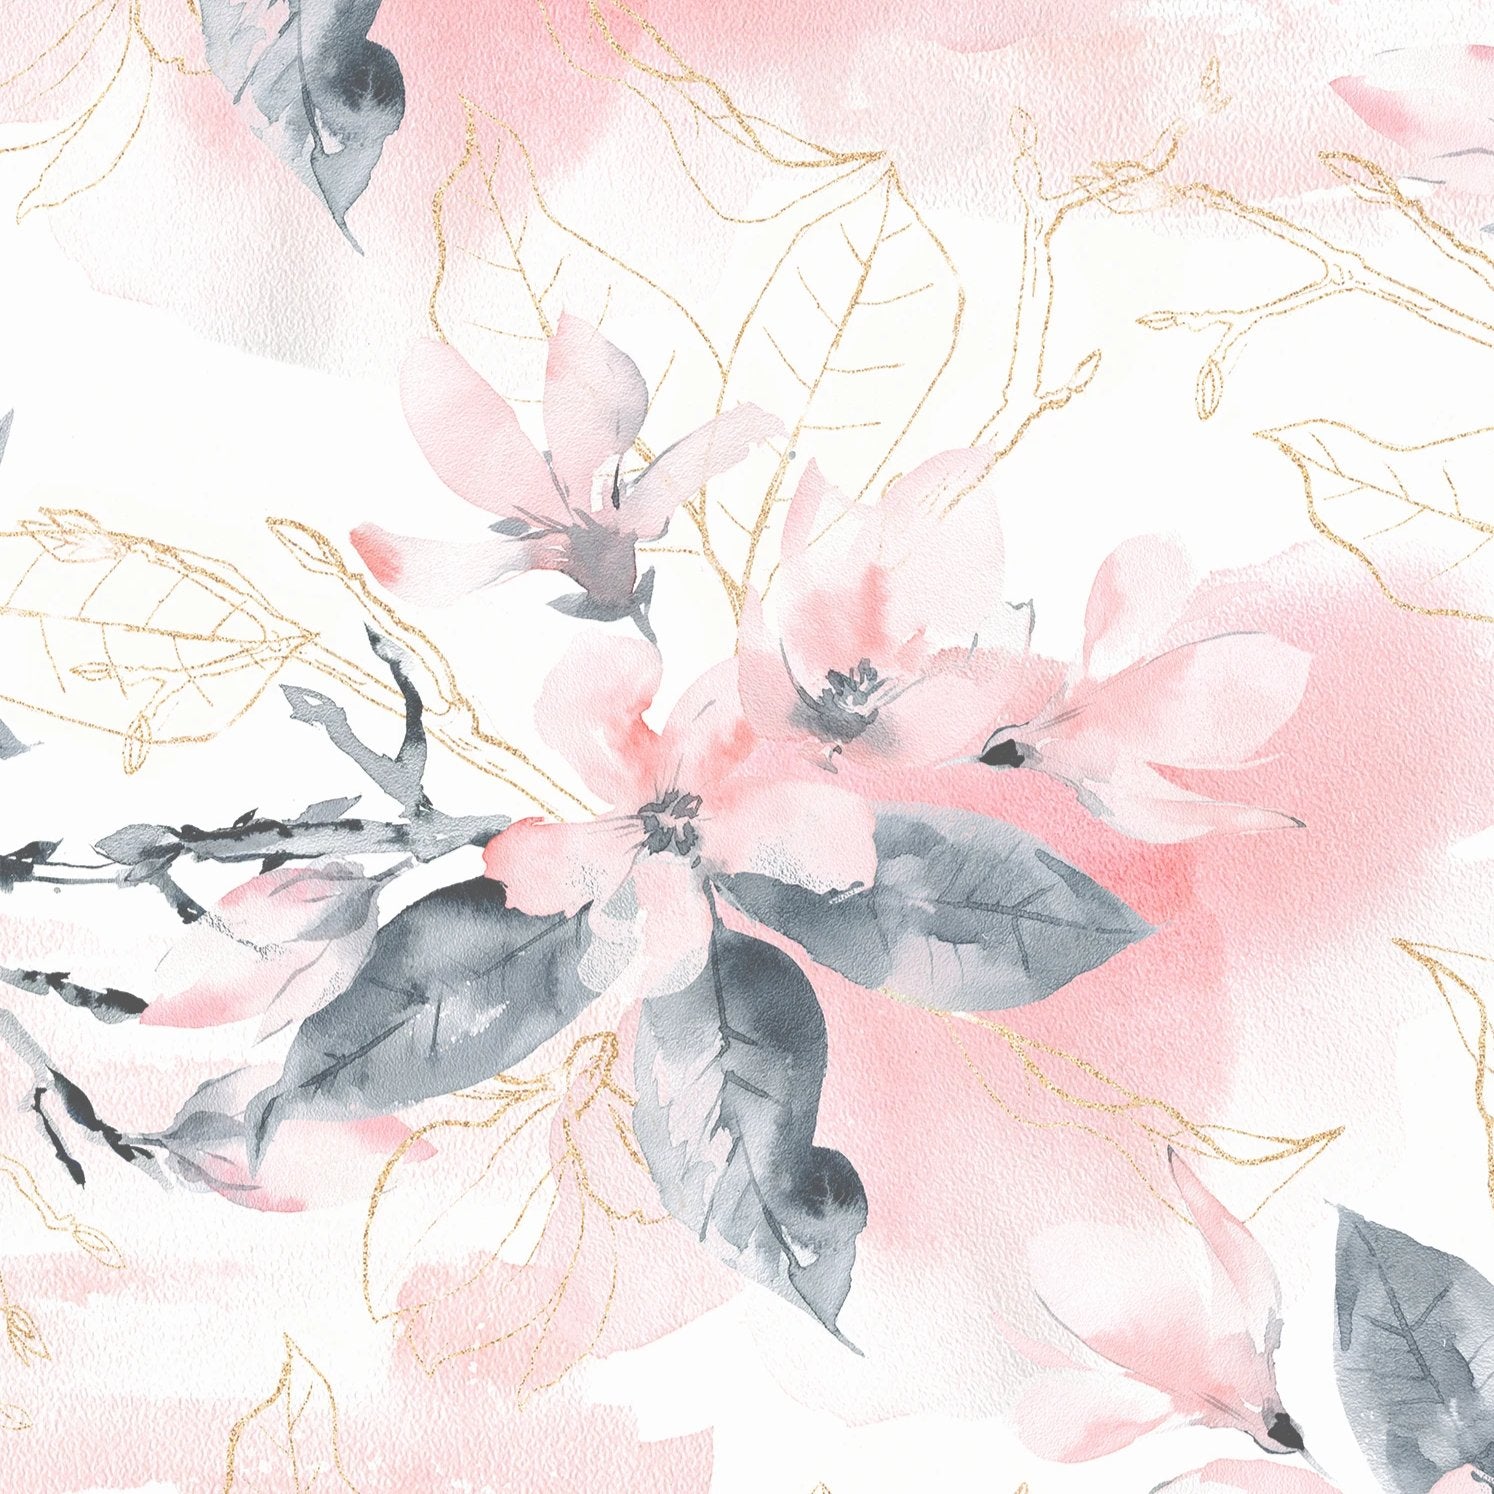 Delicate pink floral and golden branch design wallpaper from the Elegant Wisdom Wallpaper VIII collection, showcasing soft pink flowers with gray leaves and gold accents on a light pink background.